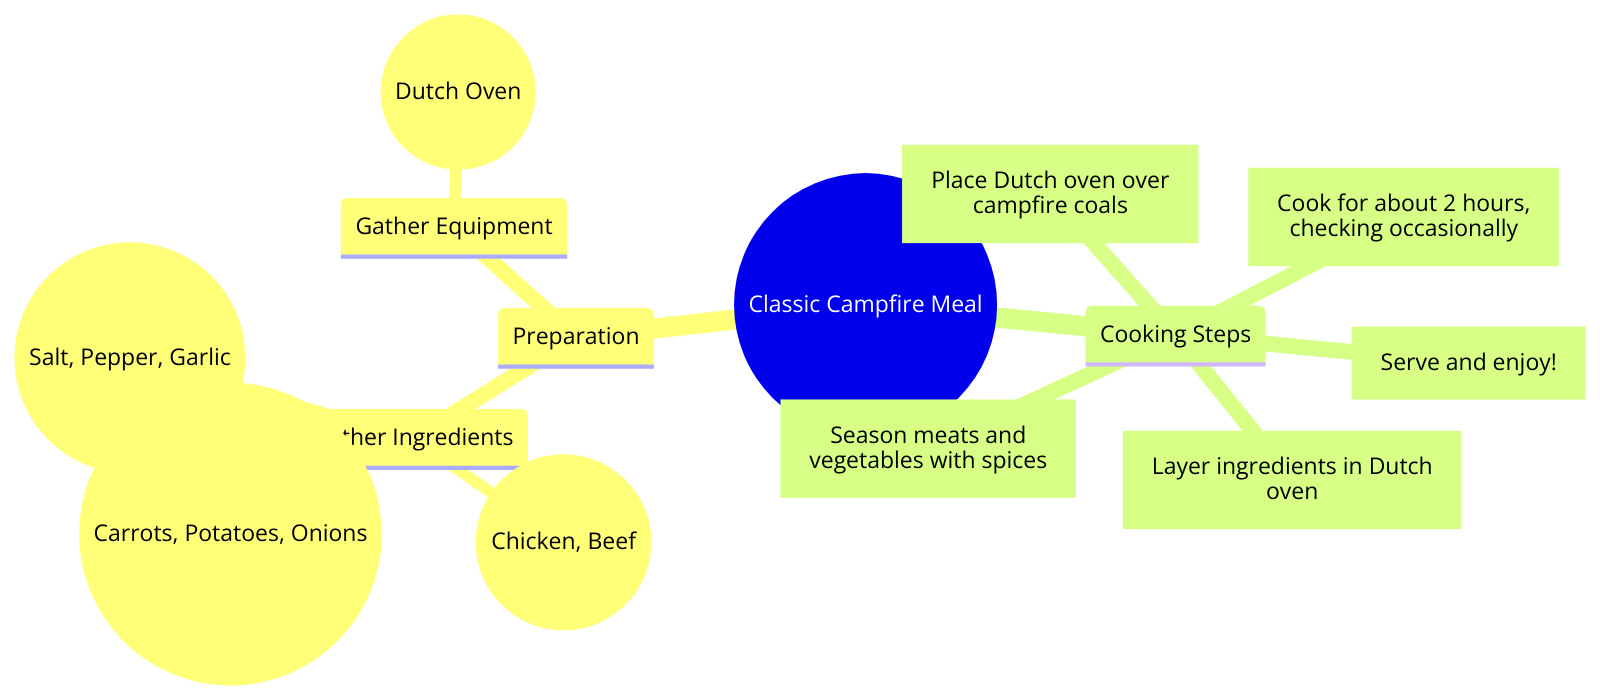  the steps and ingredients for preparing a classic campfire meal using a Dutch oven